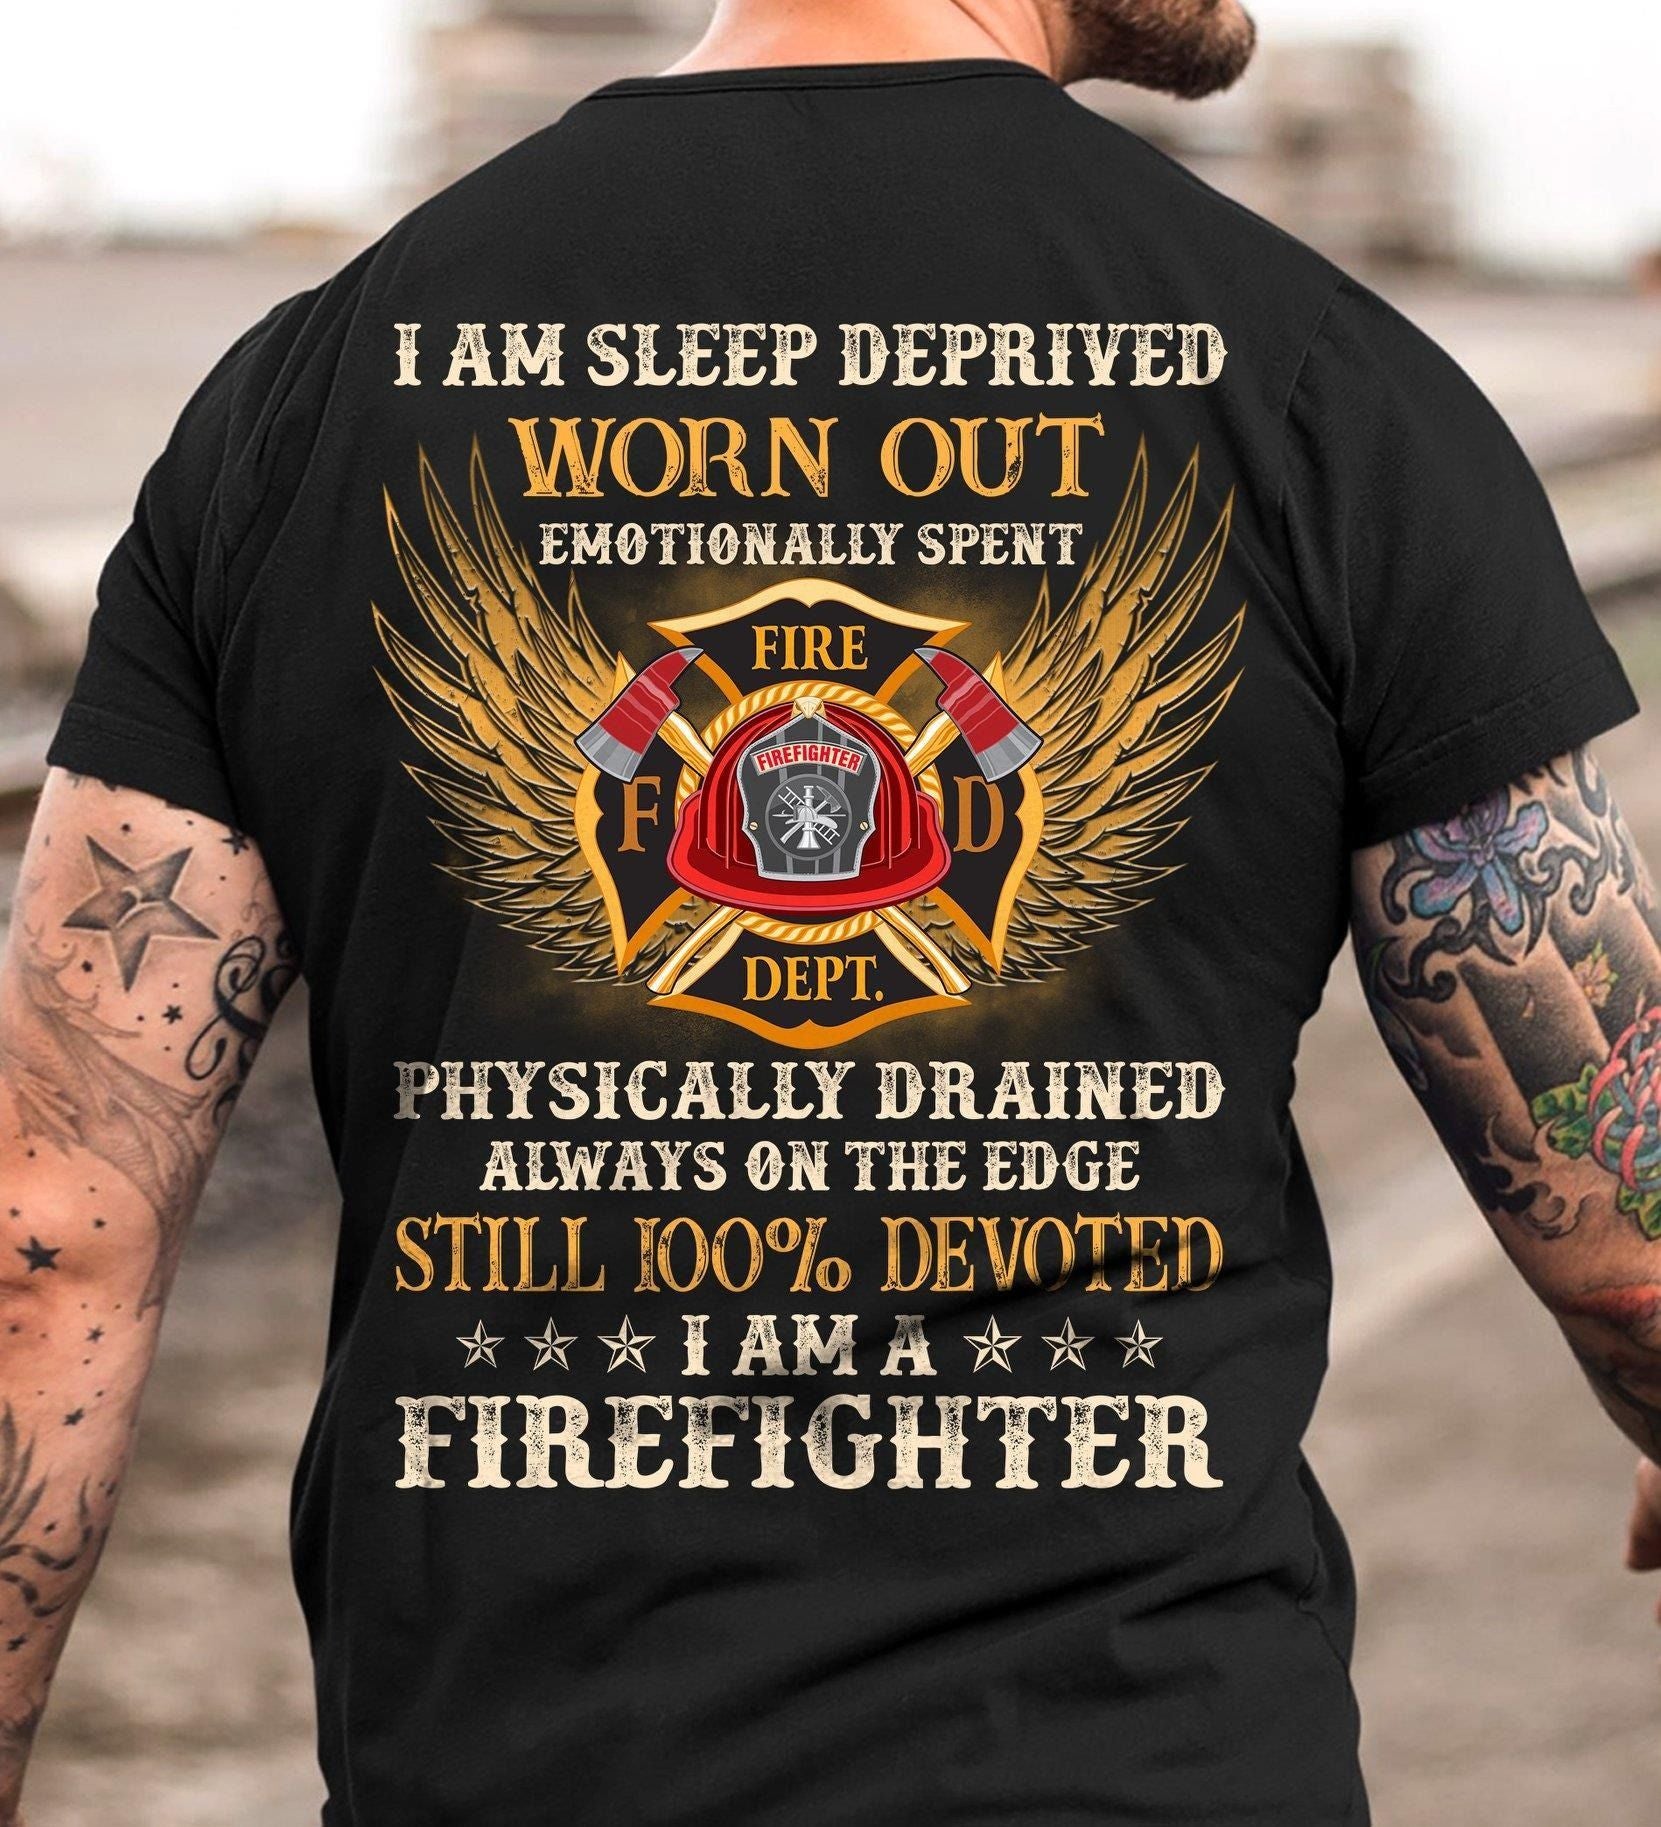 PresentsPrints, Firefighter I am sleep deprived worn out emotionally spent physically drained always on the edge T shirt Hoodie Sweater Shirt Hoodie Sweater  size S-5XL